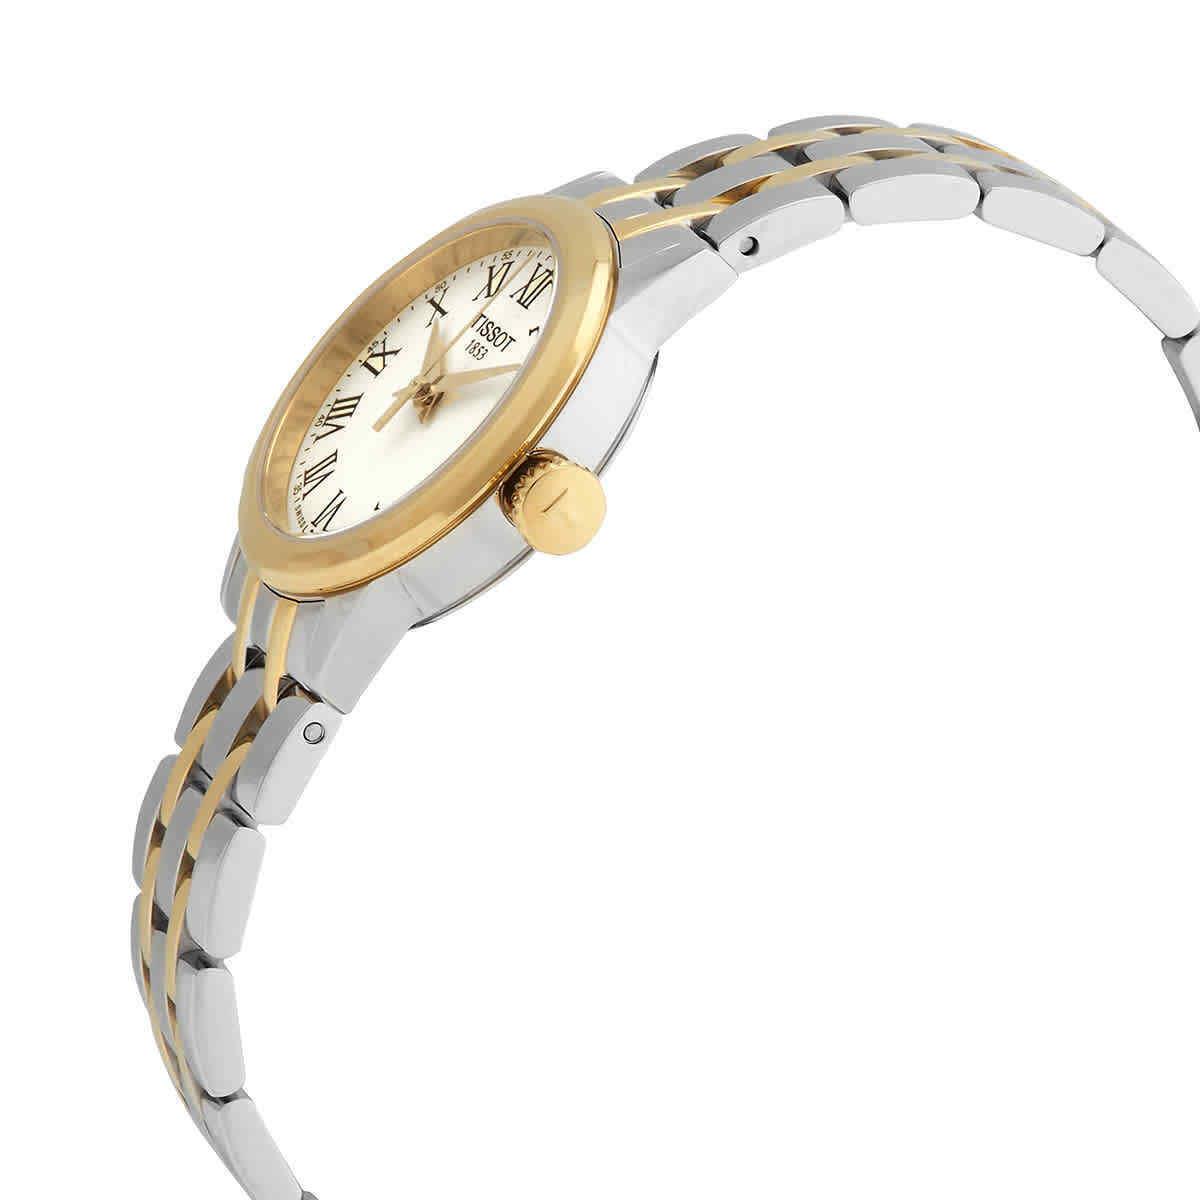 Tissot Classic Dream Quartz Ivory Dial Ladies Watch T129.210.22.263.00 - Dial: Ivory, Band: Silver, Gold, Bezel: Gold